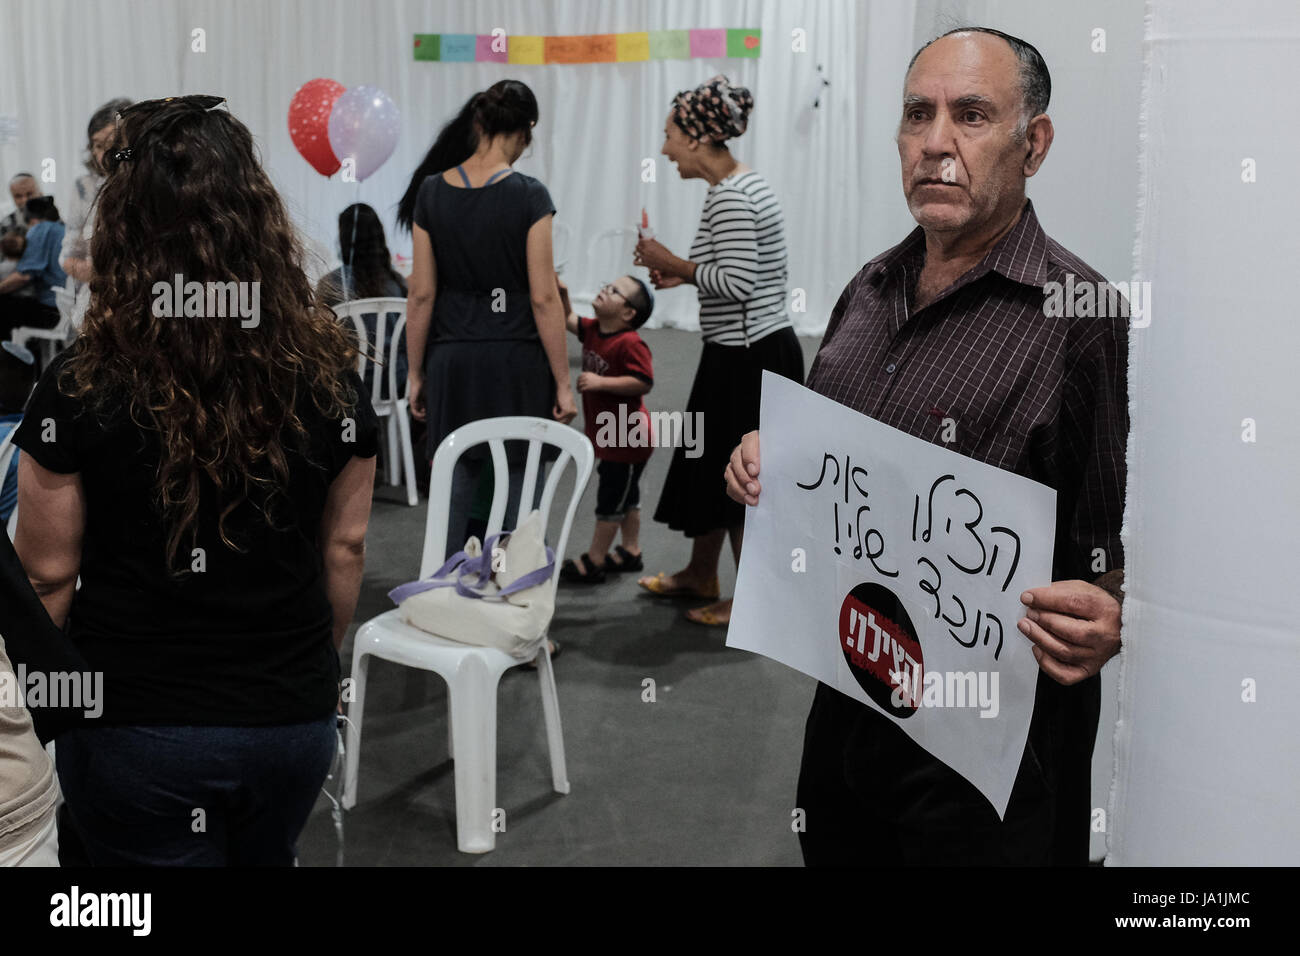 Jerusalem, Israel. 4th June, 2017. As resignation of six senior doctors and three resident doctors from the Hadassah Medical Center Pediatric Hemato Oncology department comes into force, following intense disagreements with Hadassah Director Rothstein, parents of children in treatment set up a mock field hospital protesting Minister of Health, Litzman's, refusal to establish an equivalent department at Shaare Zedek Medical Center. Anxious parents await a Supreme Court decision to their petition against Health Minister Litzman as they are left with no other alternative for aiding their children Stock Photo